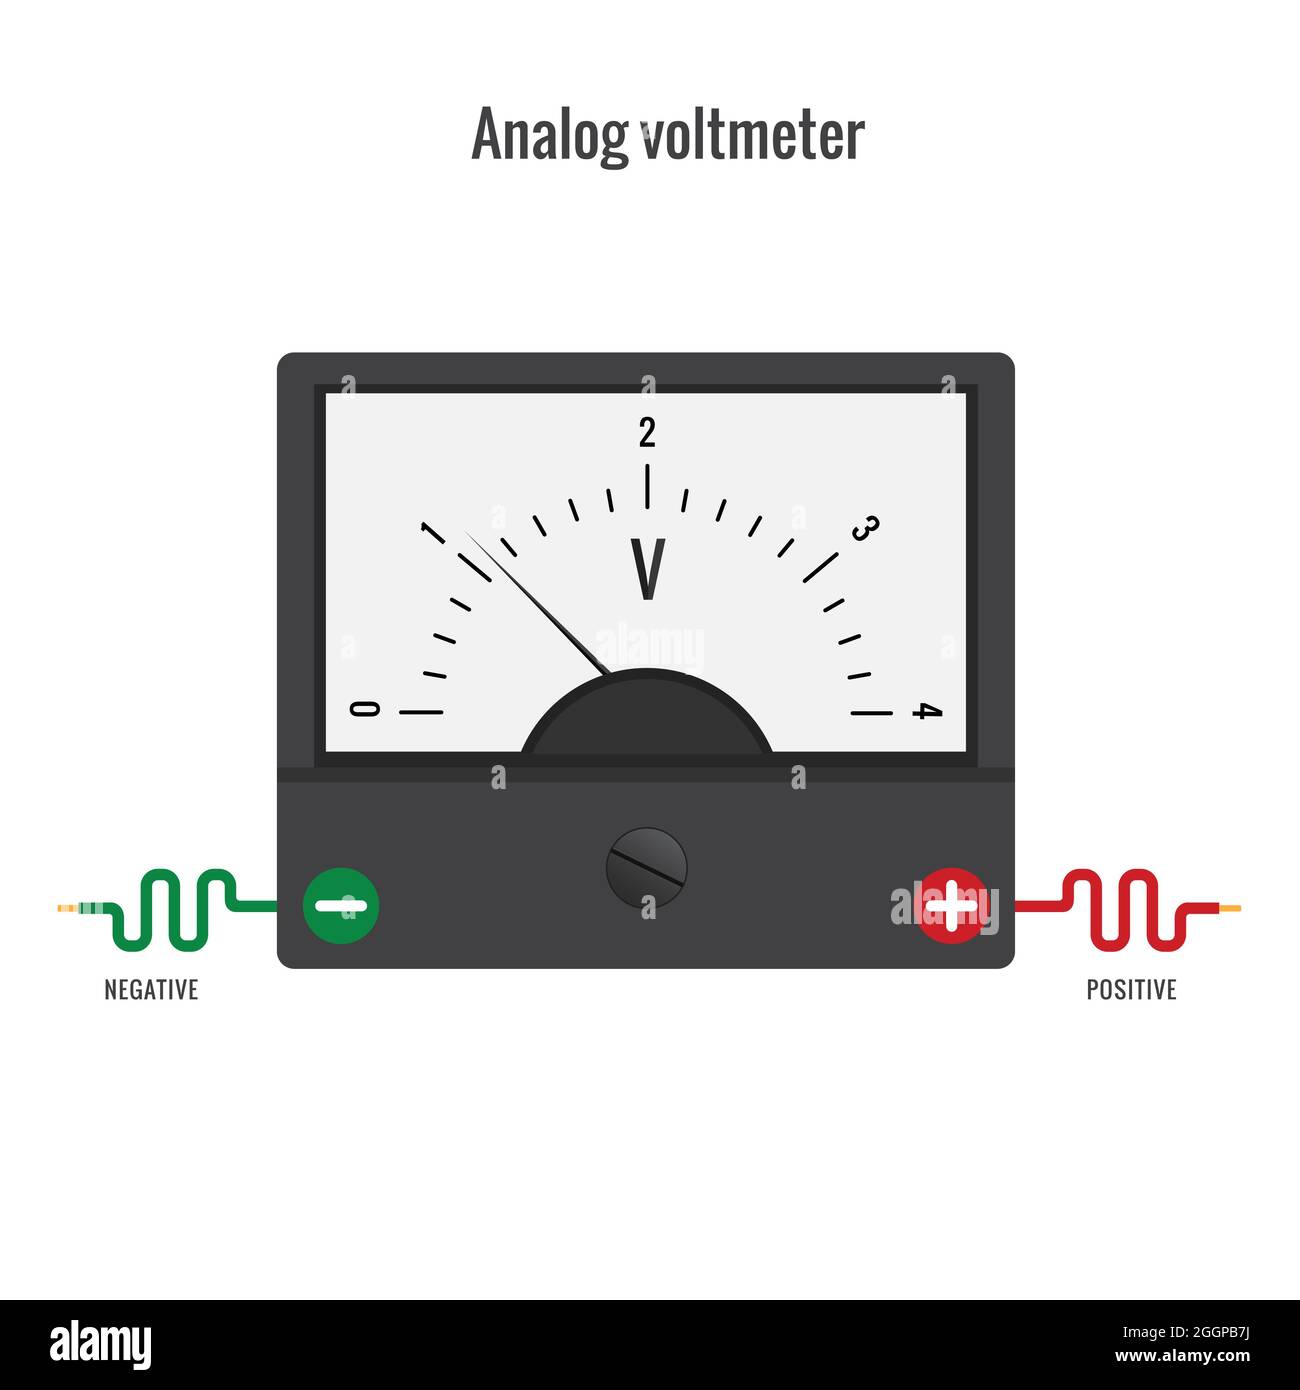 Analog voltmeter. The voltmeter is a physical device for measuring